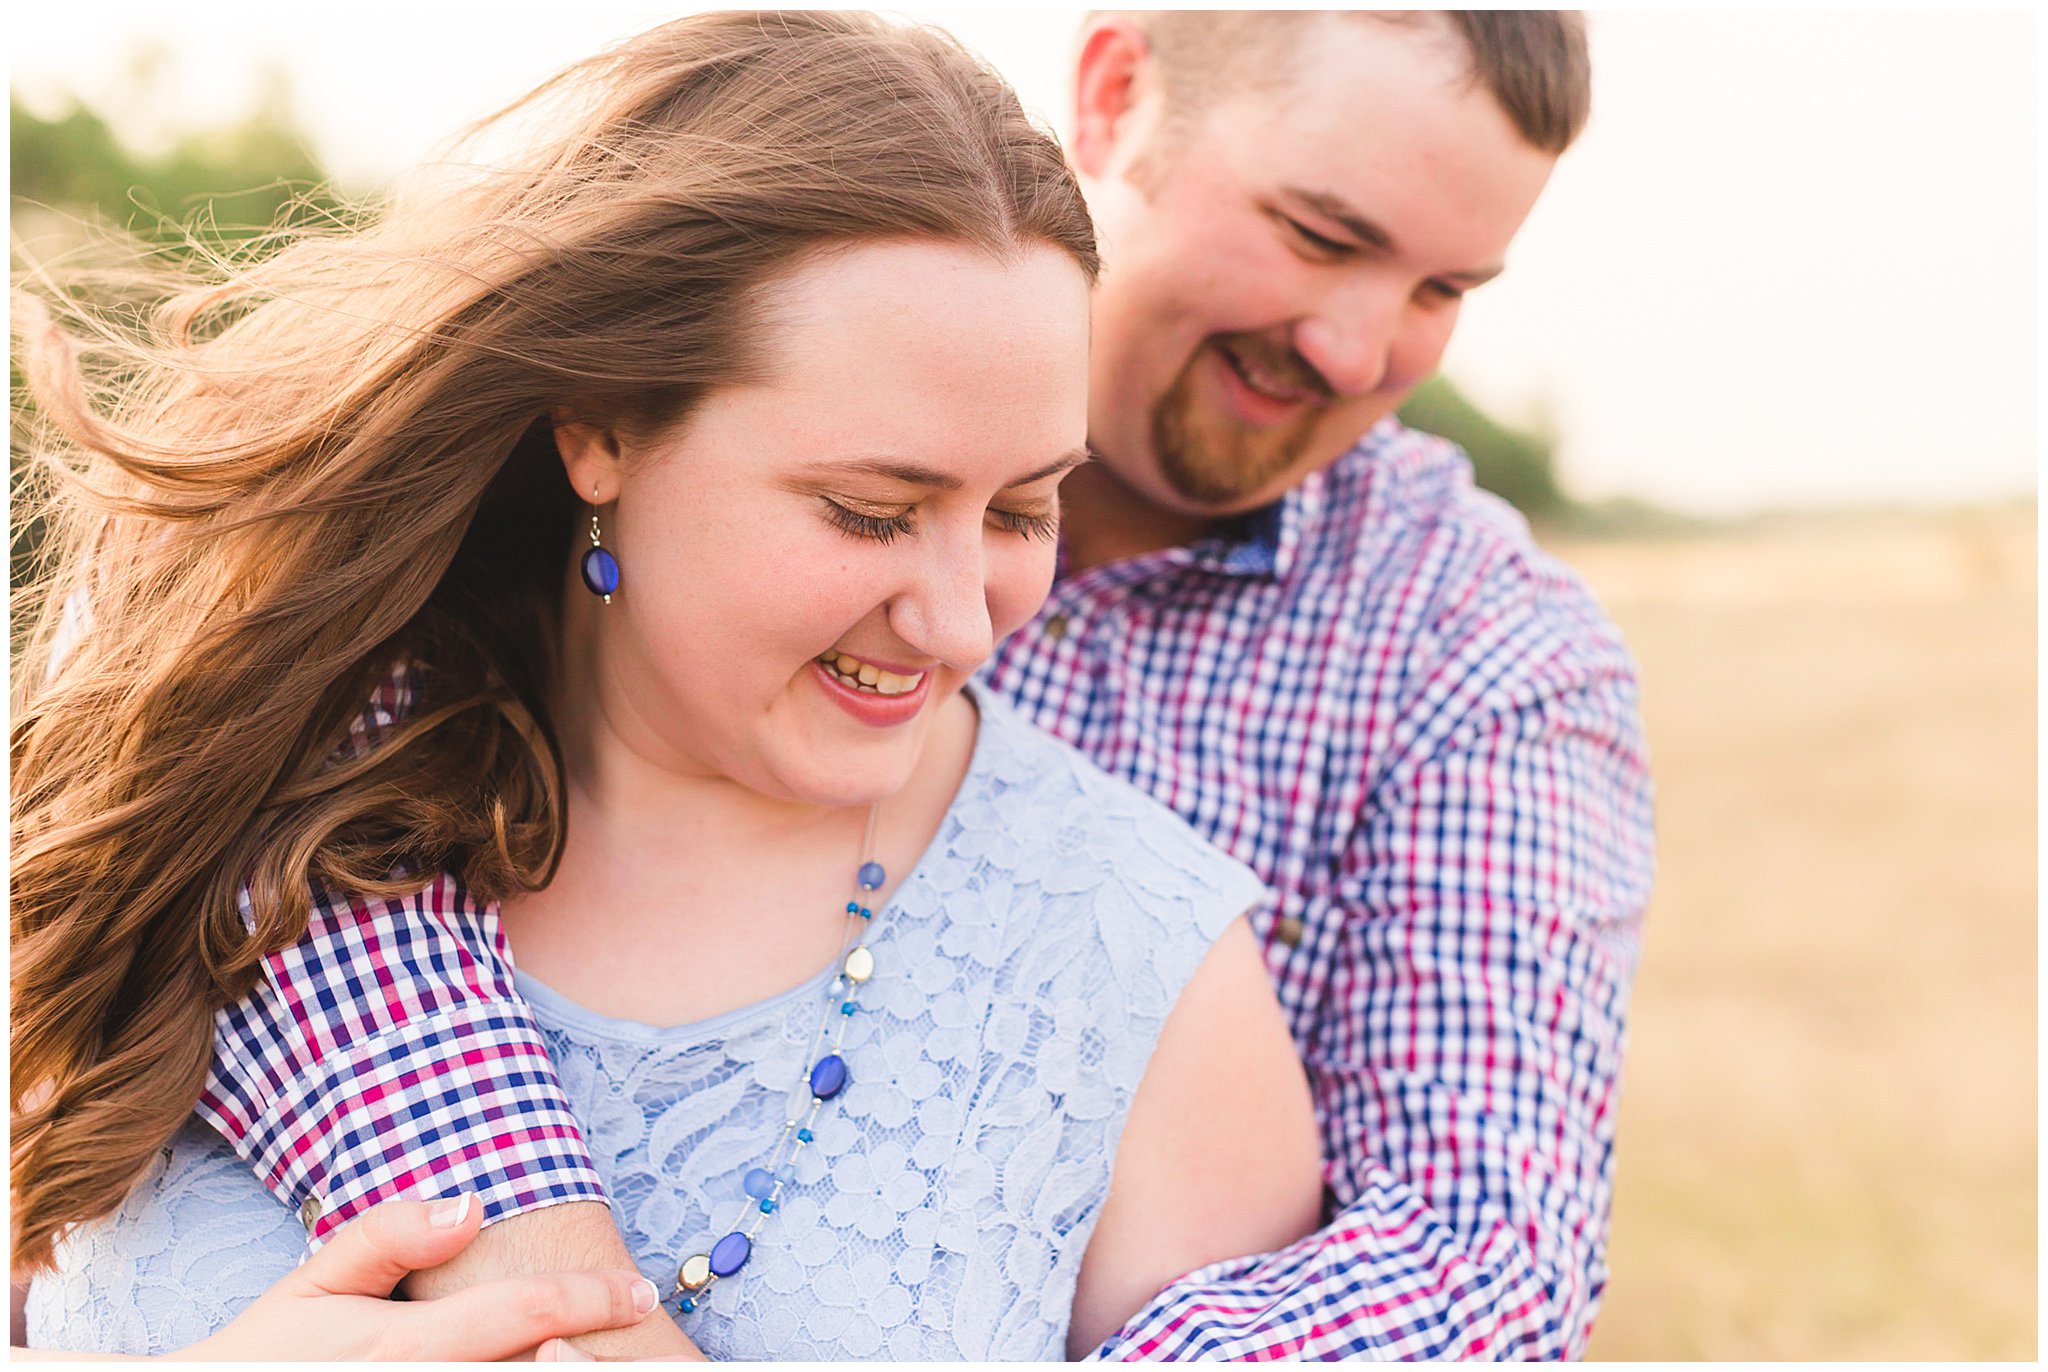 rustic engagement session